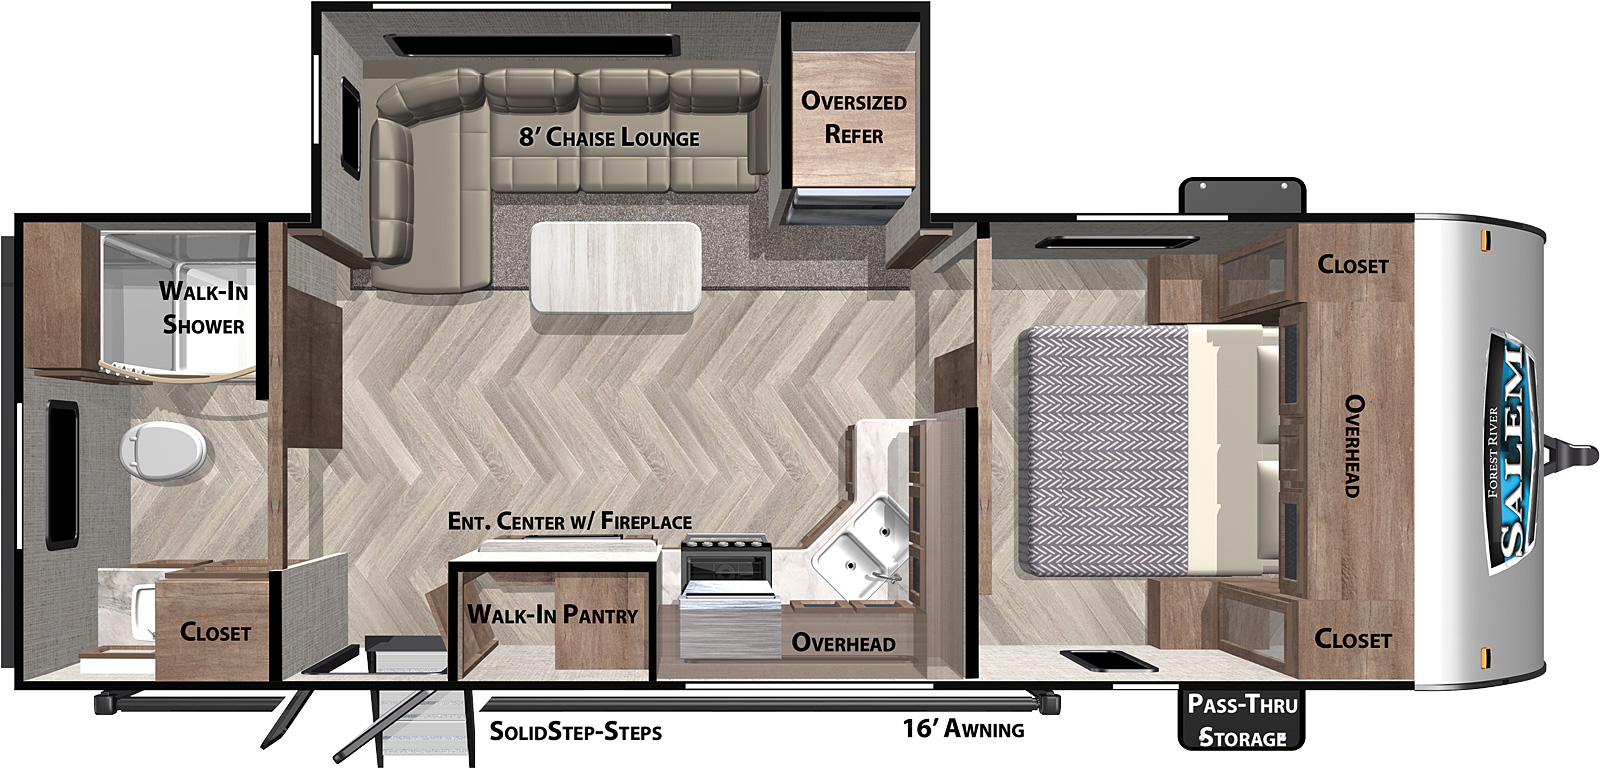 Salem Northwest T22RBS floorplan. The T22RBS has one slide out and one entry door.